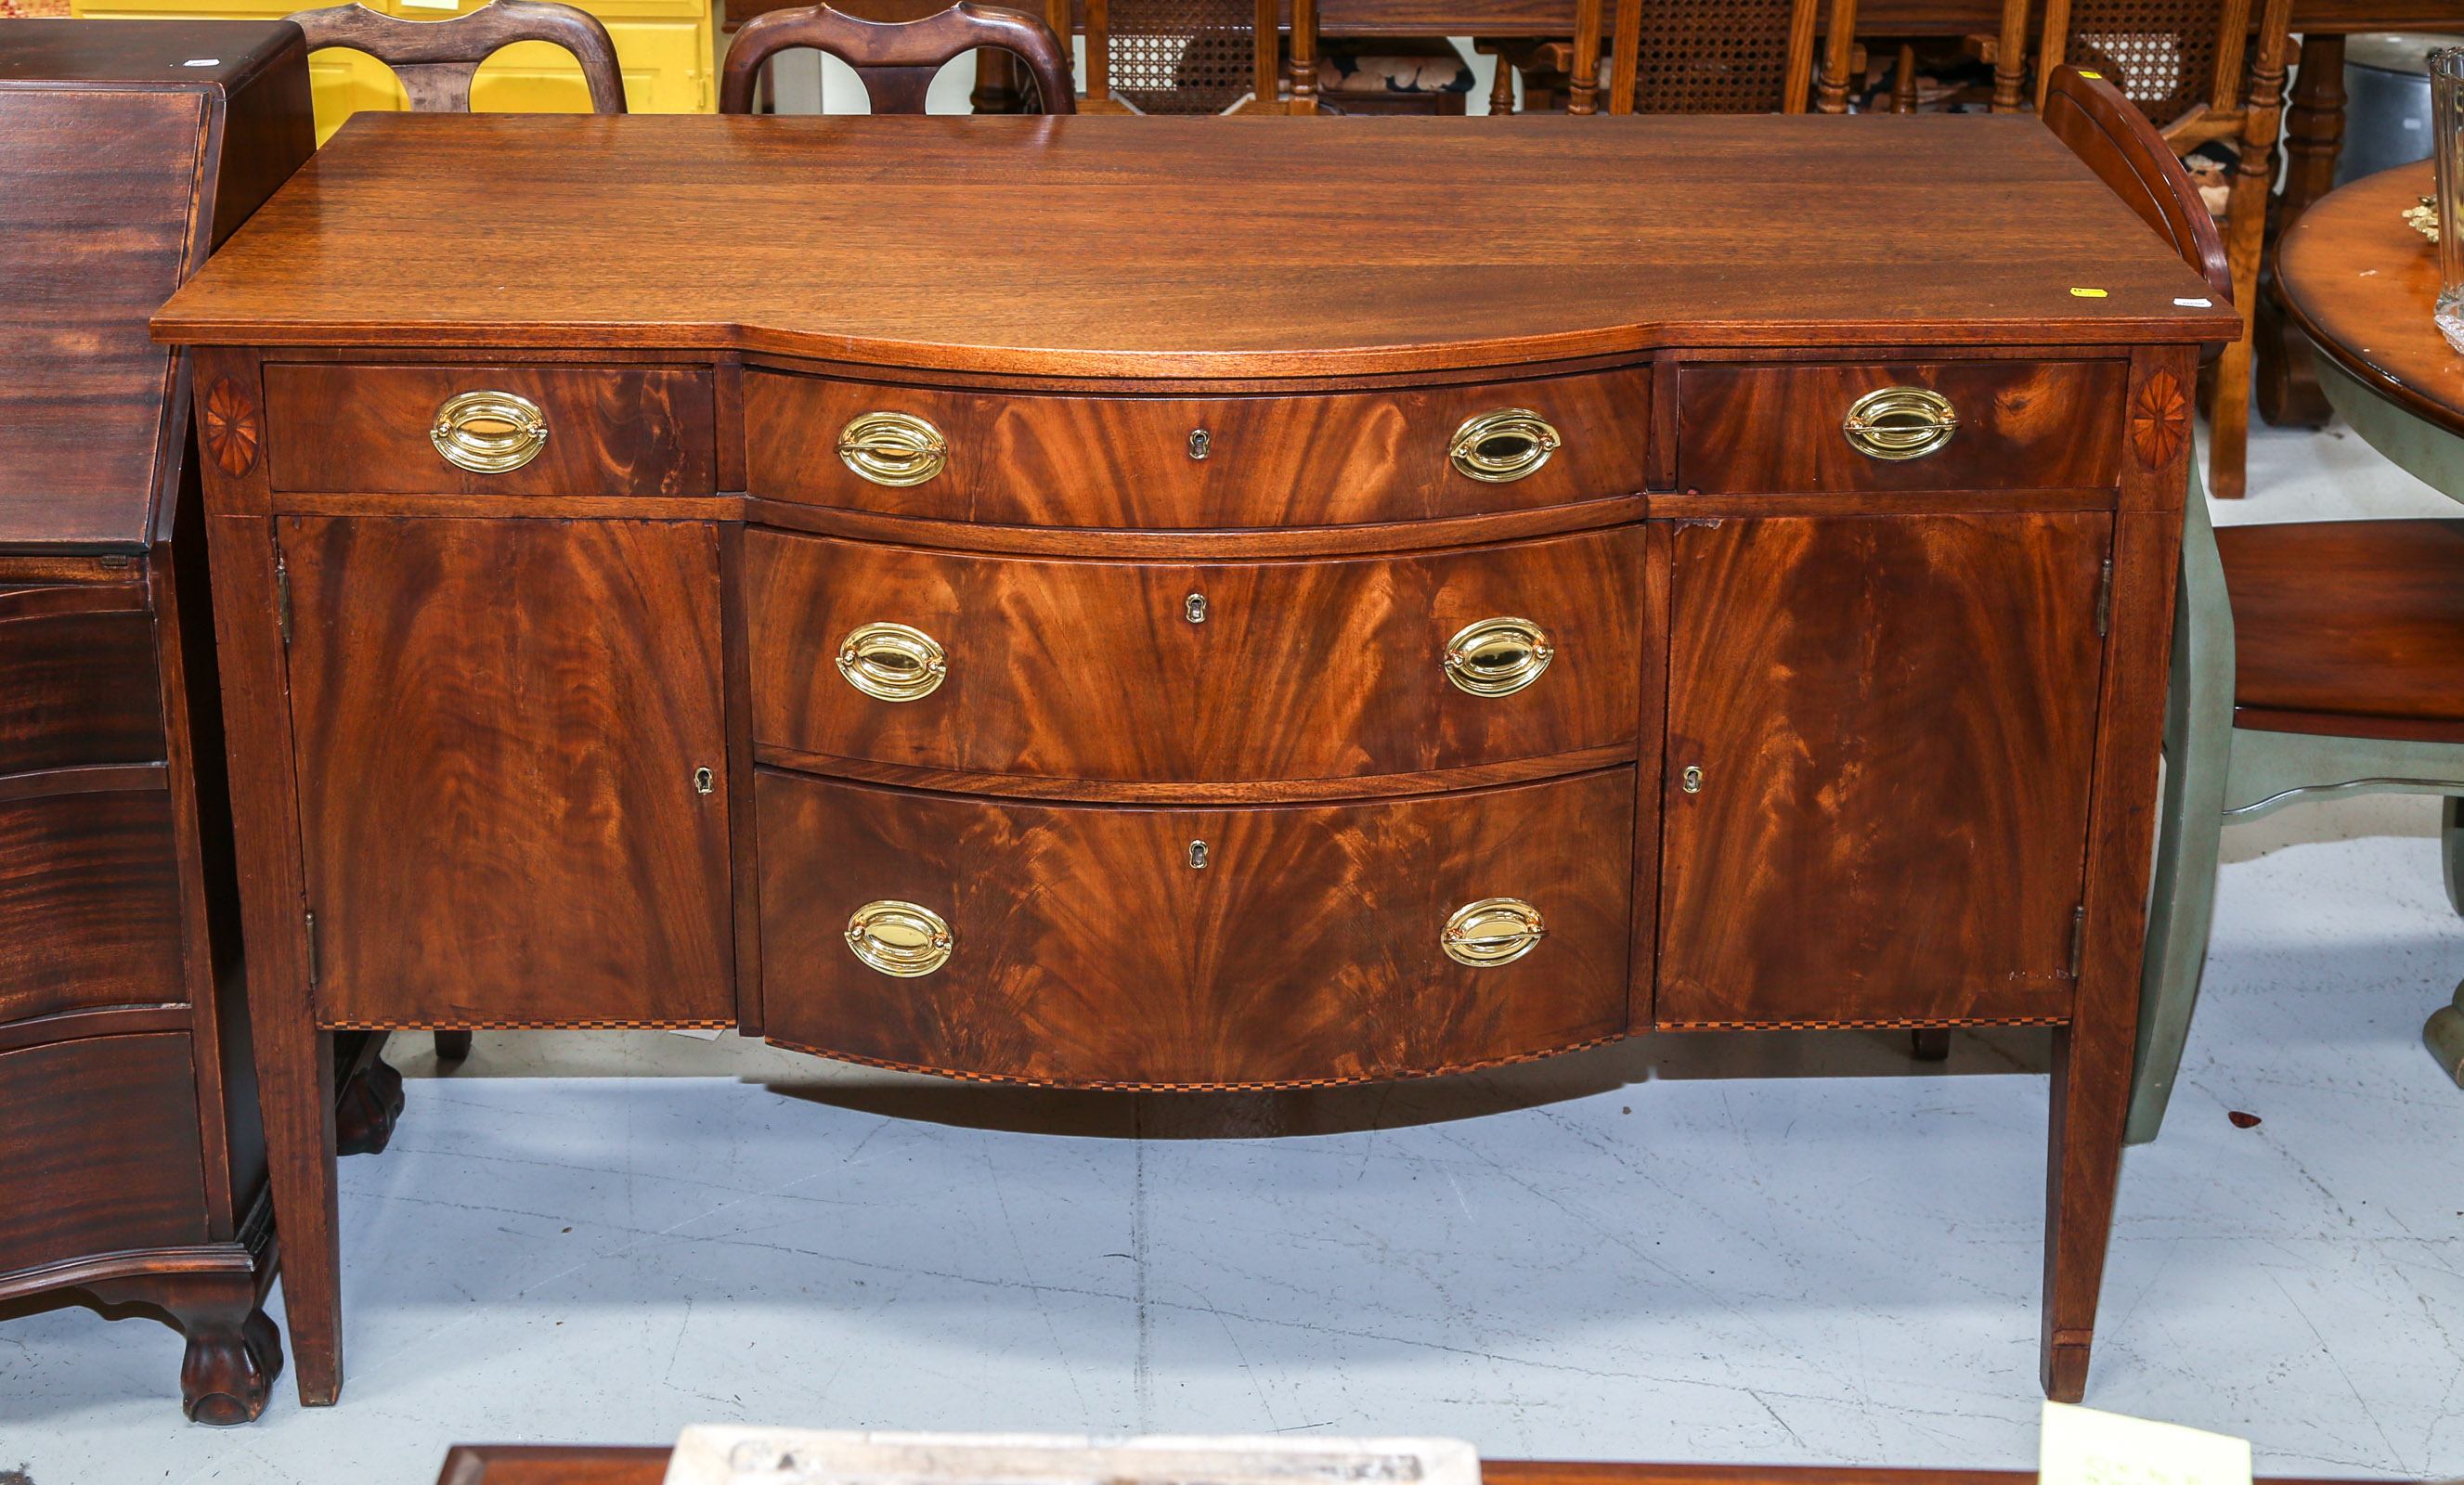 FEDERAL STYLE INLAID MAHOGANY SIDEBOARD 2e9dff